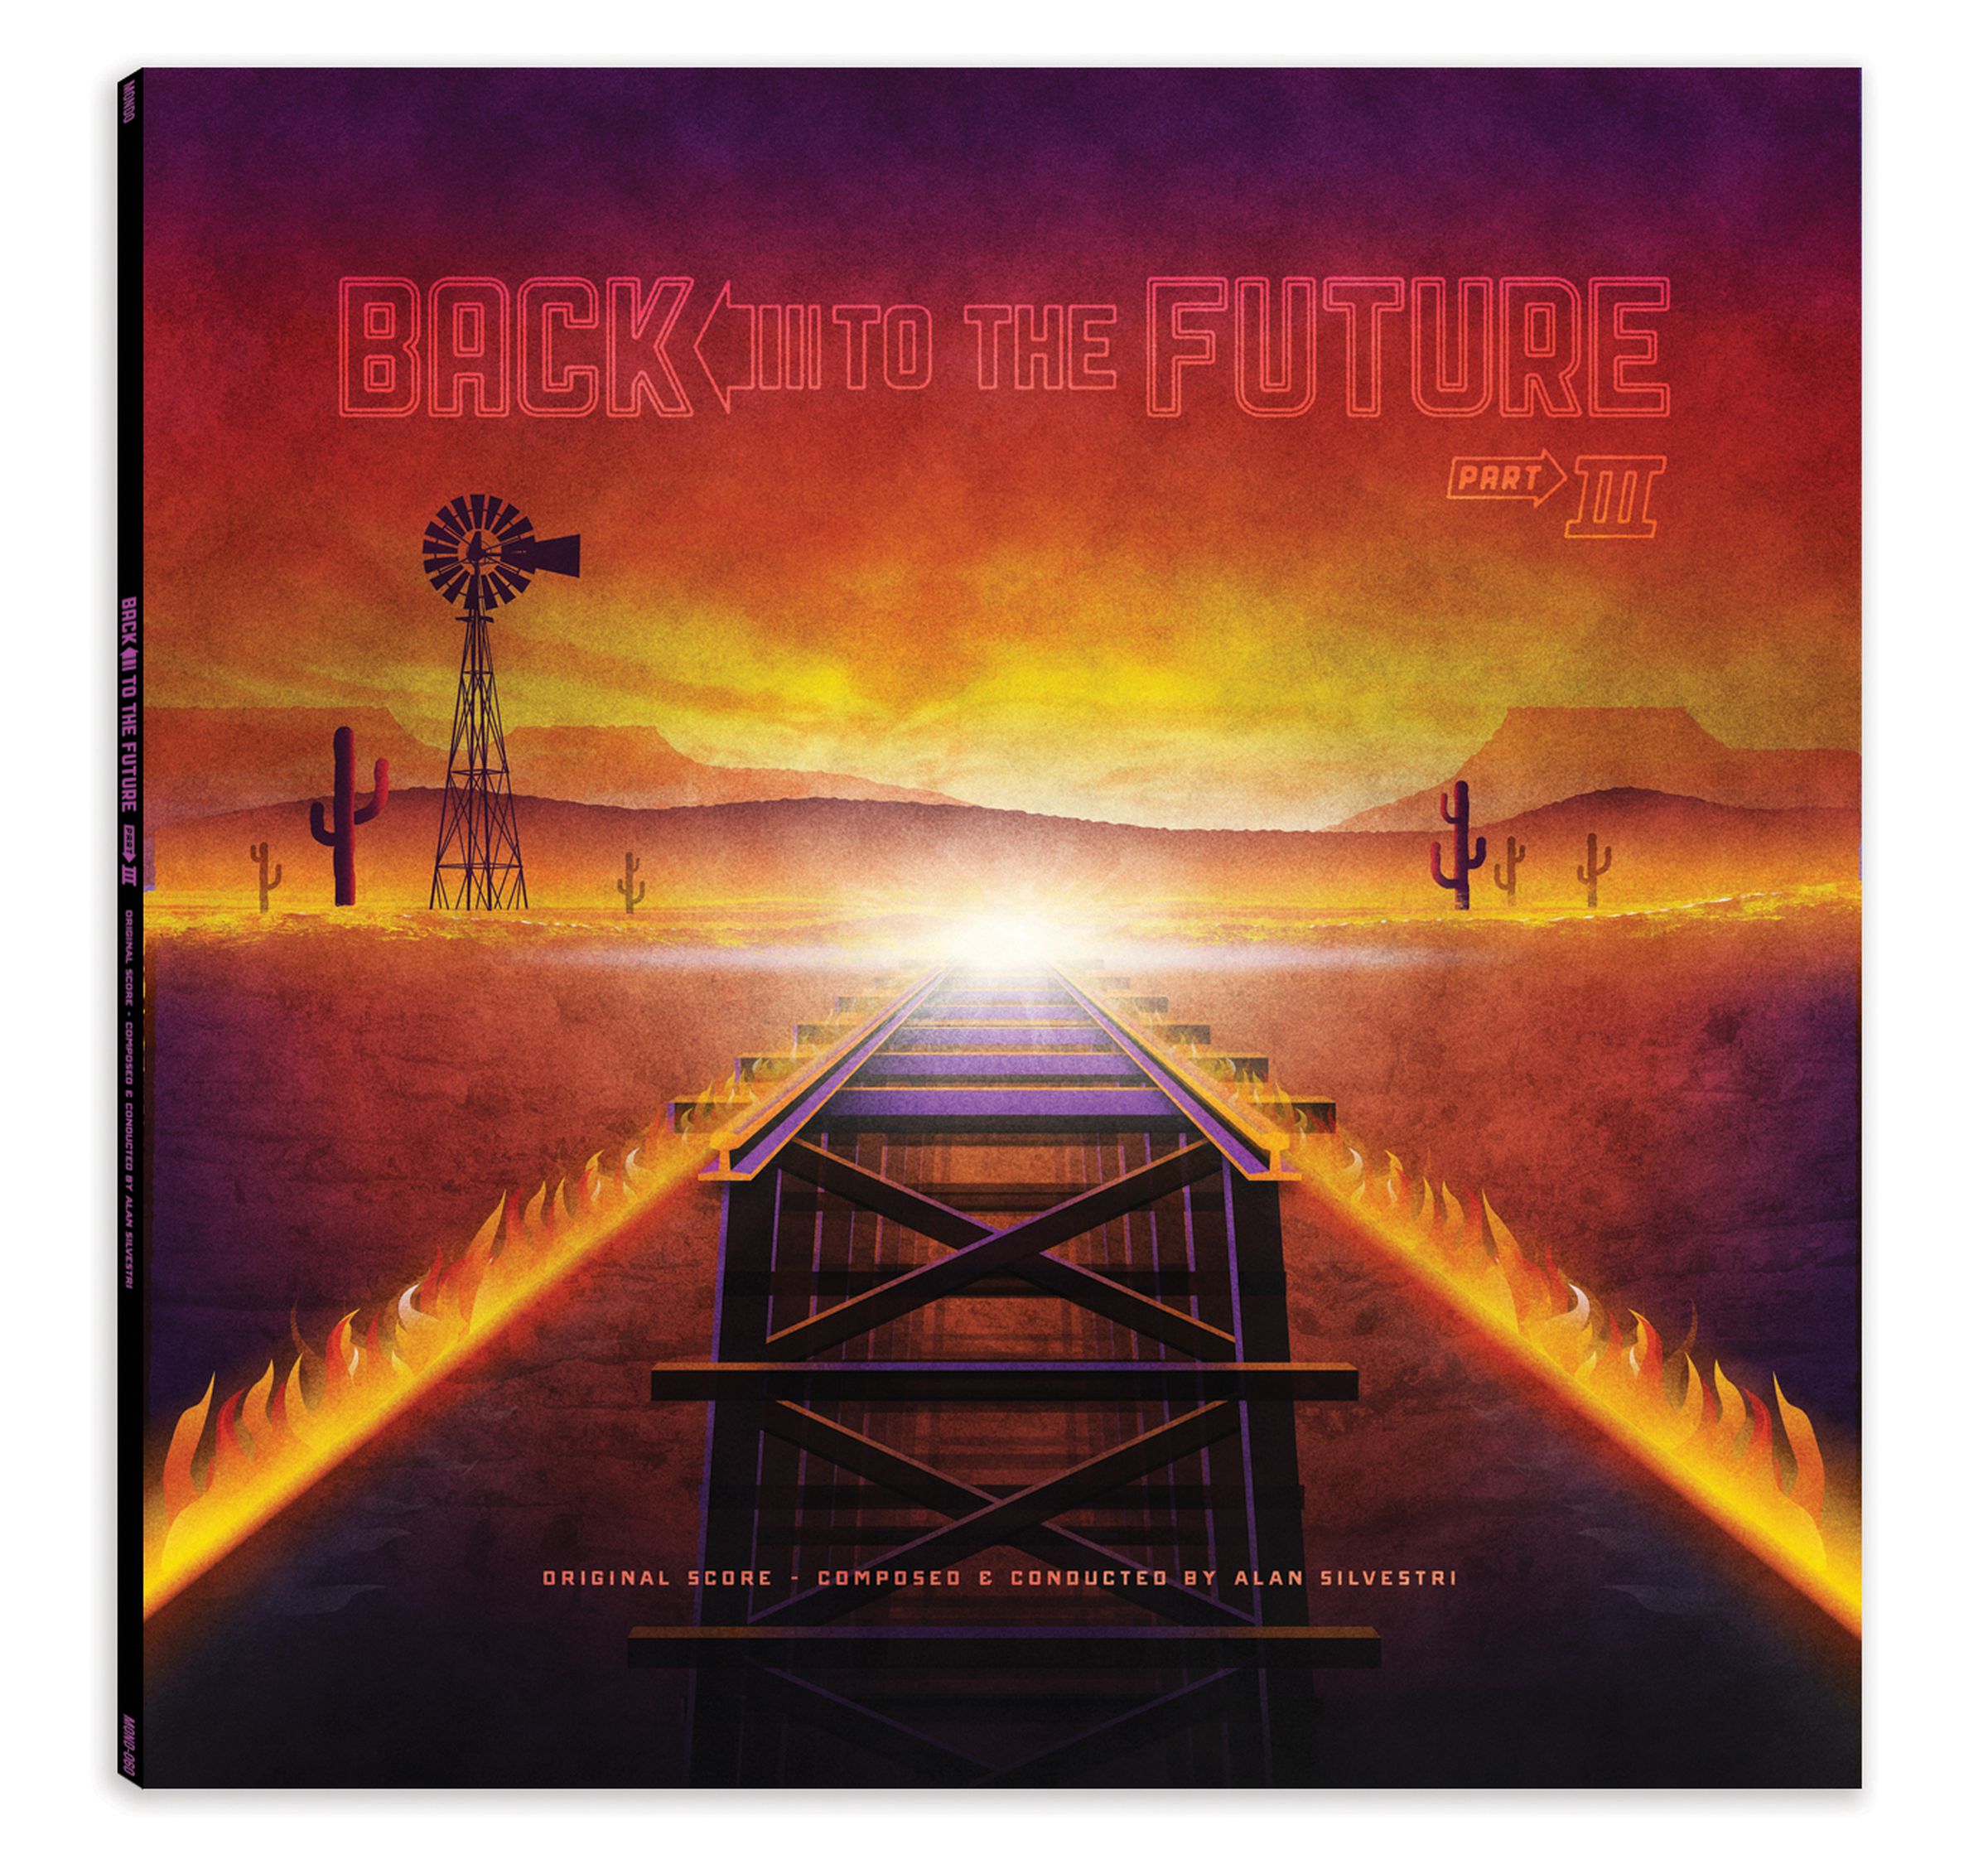 Back to the Future soundtrack